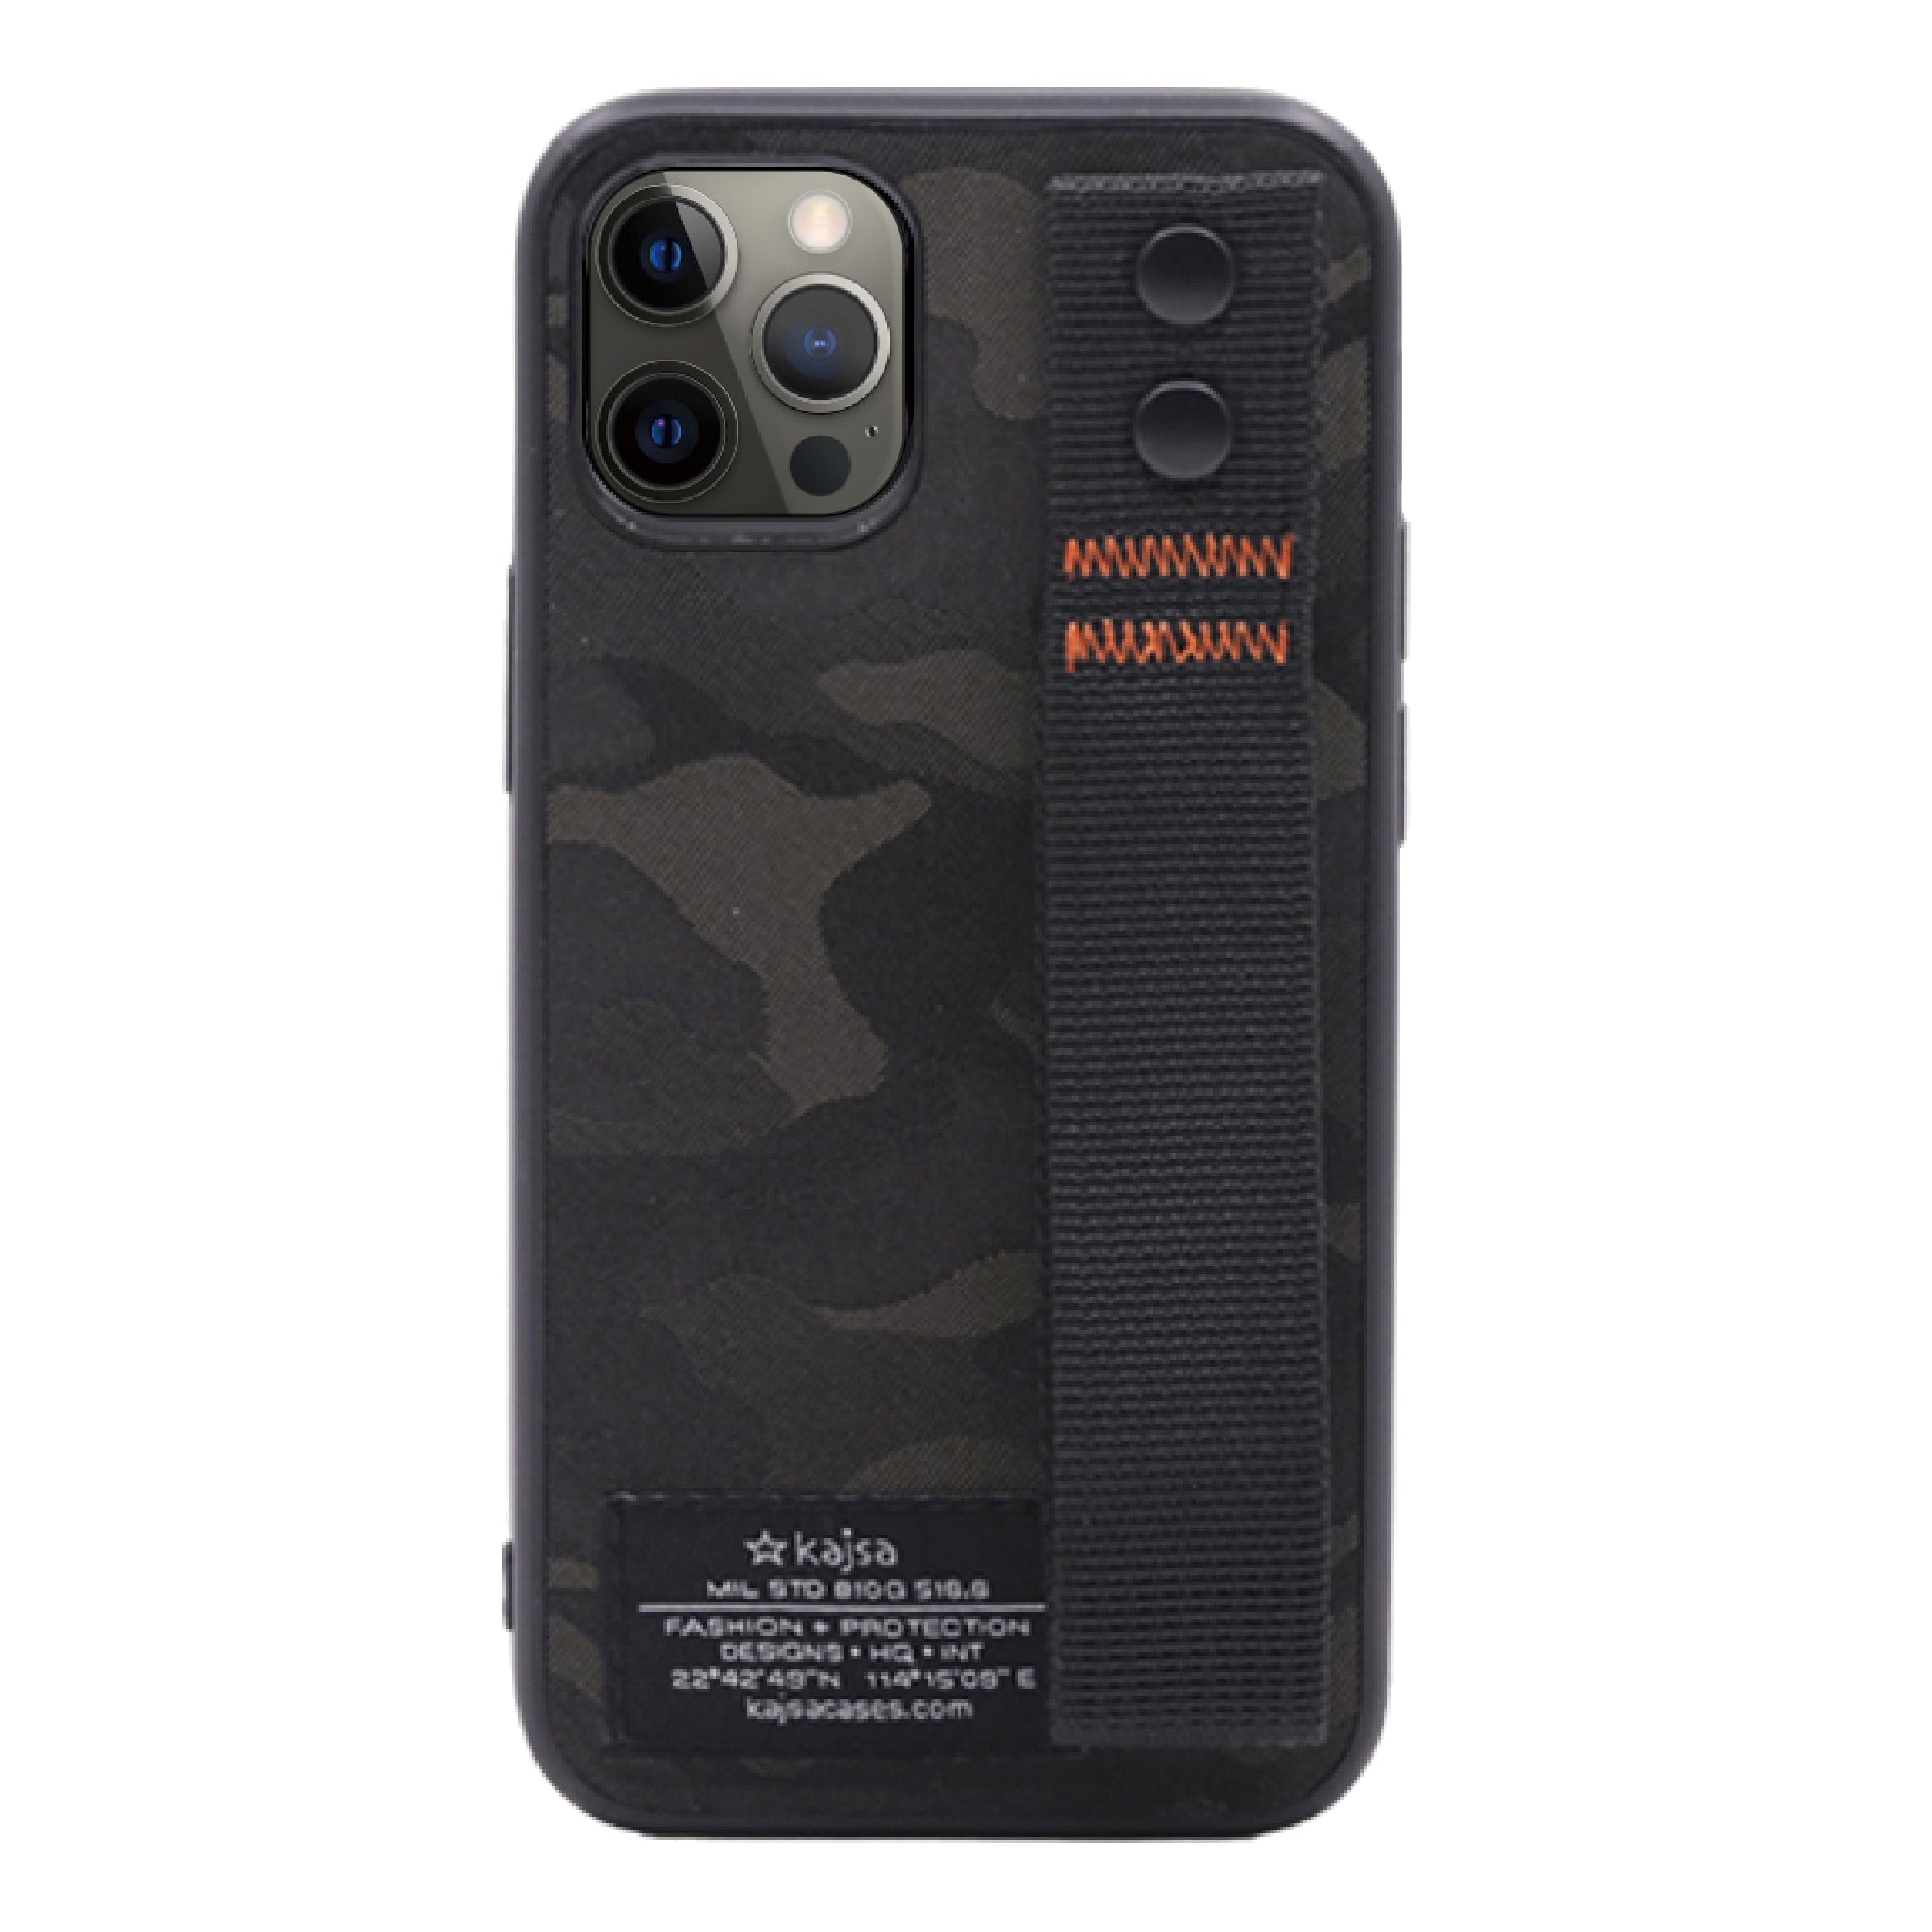 Outdoor Collection - Camo Satin back case for iPhone 12-Phone Case- phone case - phone cases- phone cover- iphone cover- iphone case- iphone cases- leather case- leather cases- DIYCASE - custom case - leather cover - hand strap case - croco pattern case - snake pattern case - carbon fiber phone case - phone case brand - unique phone case - high quality - phone case brand - protective case - buy phone case hong kong - online buy phone case - iphone‎手機殼 - 客製化手機殼 - samsung ‎手機殼 - 香港手機殼 - 買電話殼